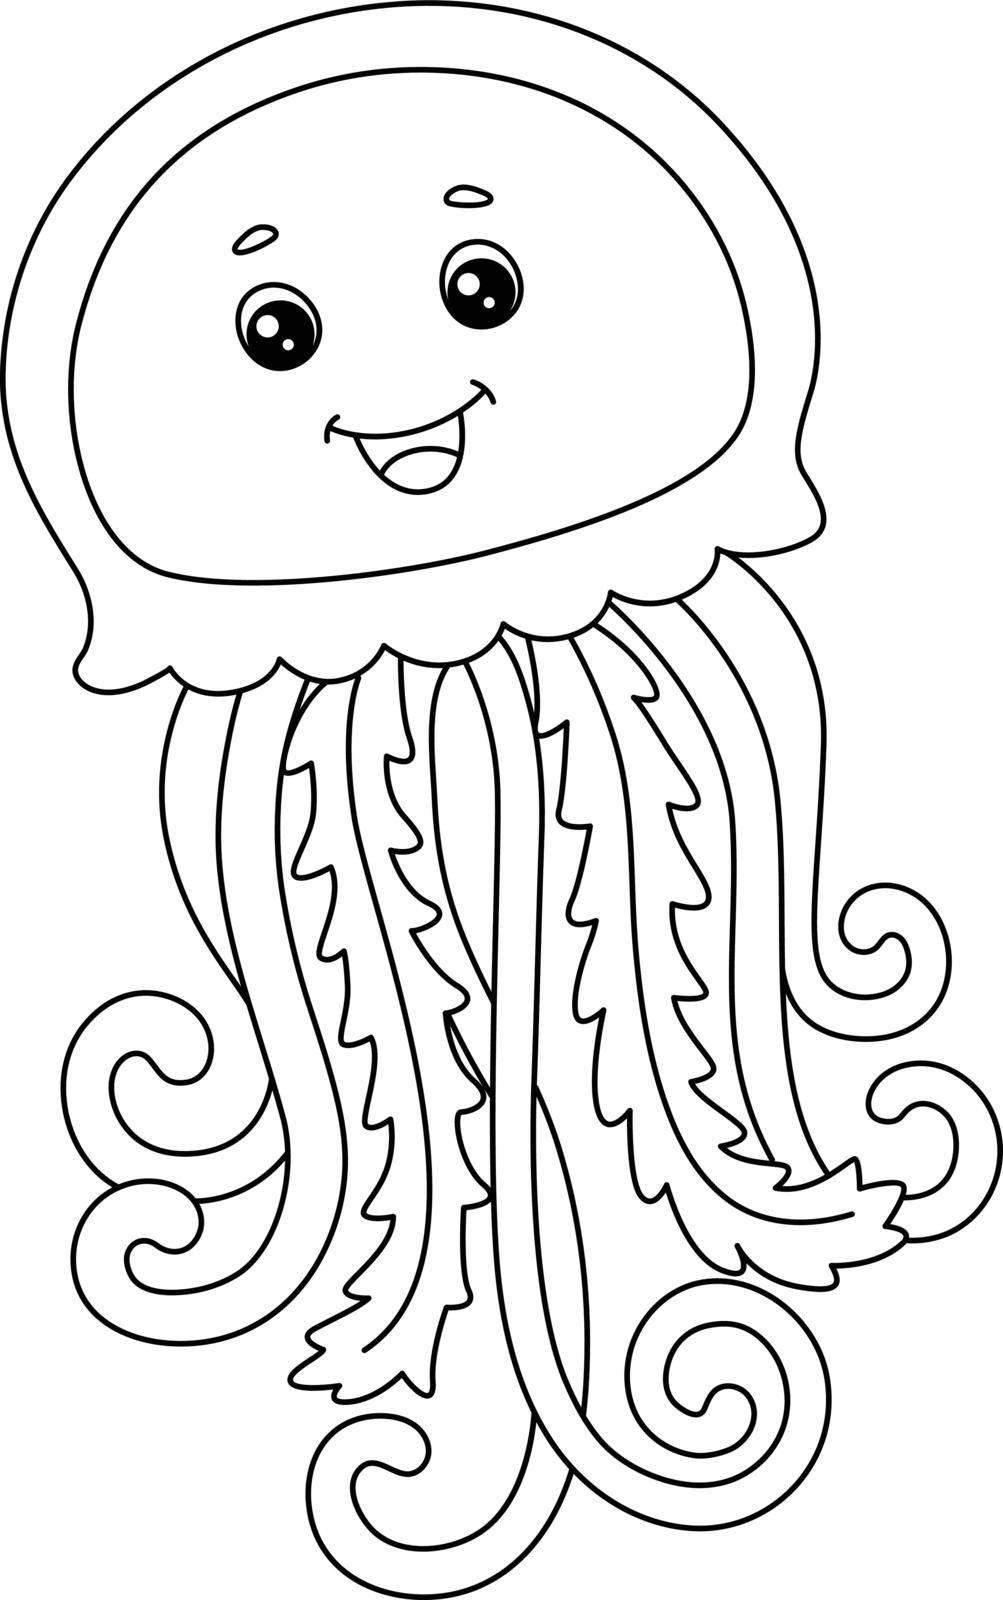 A cute and funny coloring page of sea jellies. Provides hours of coloring fun for children. To color, this page is very easy. Suitable for little kids and toddlers.